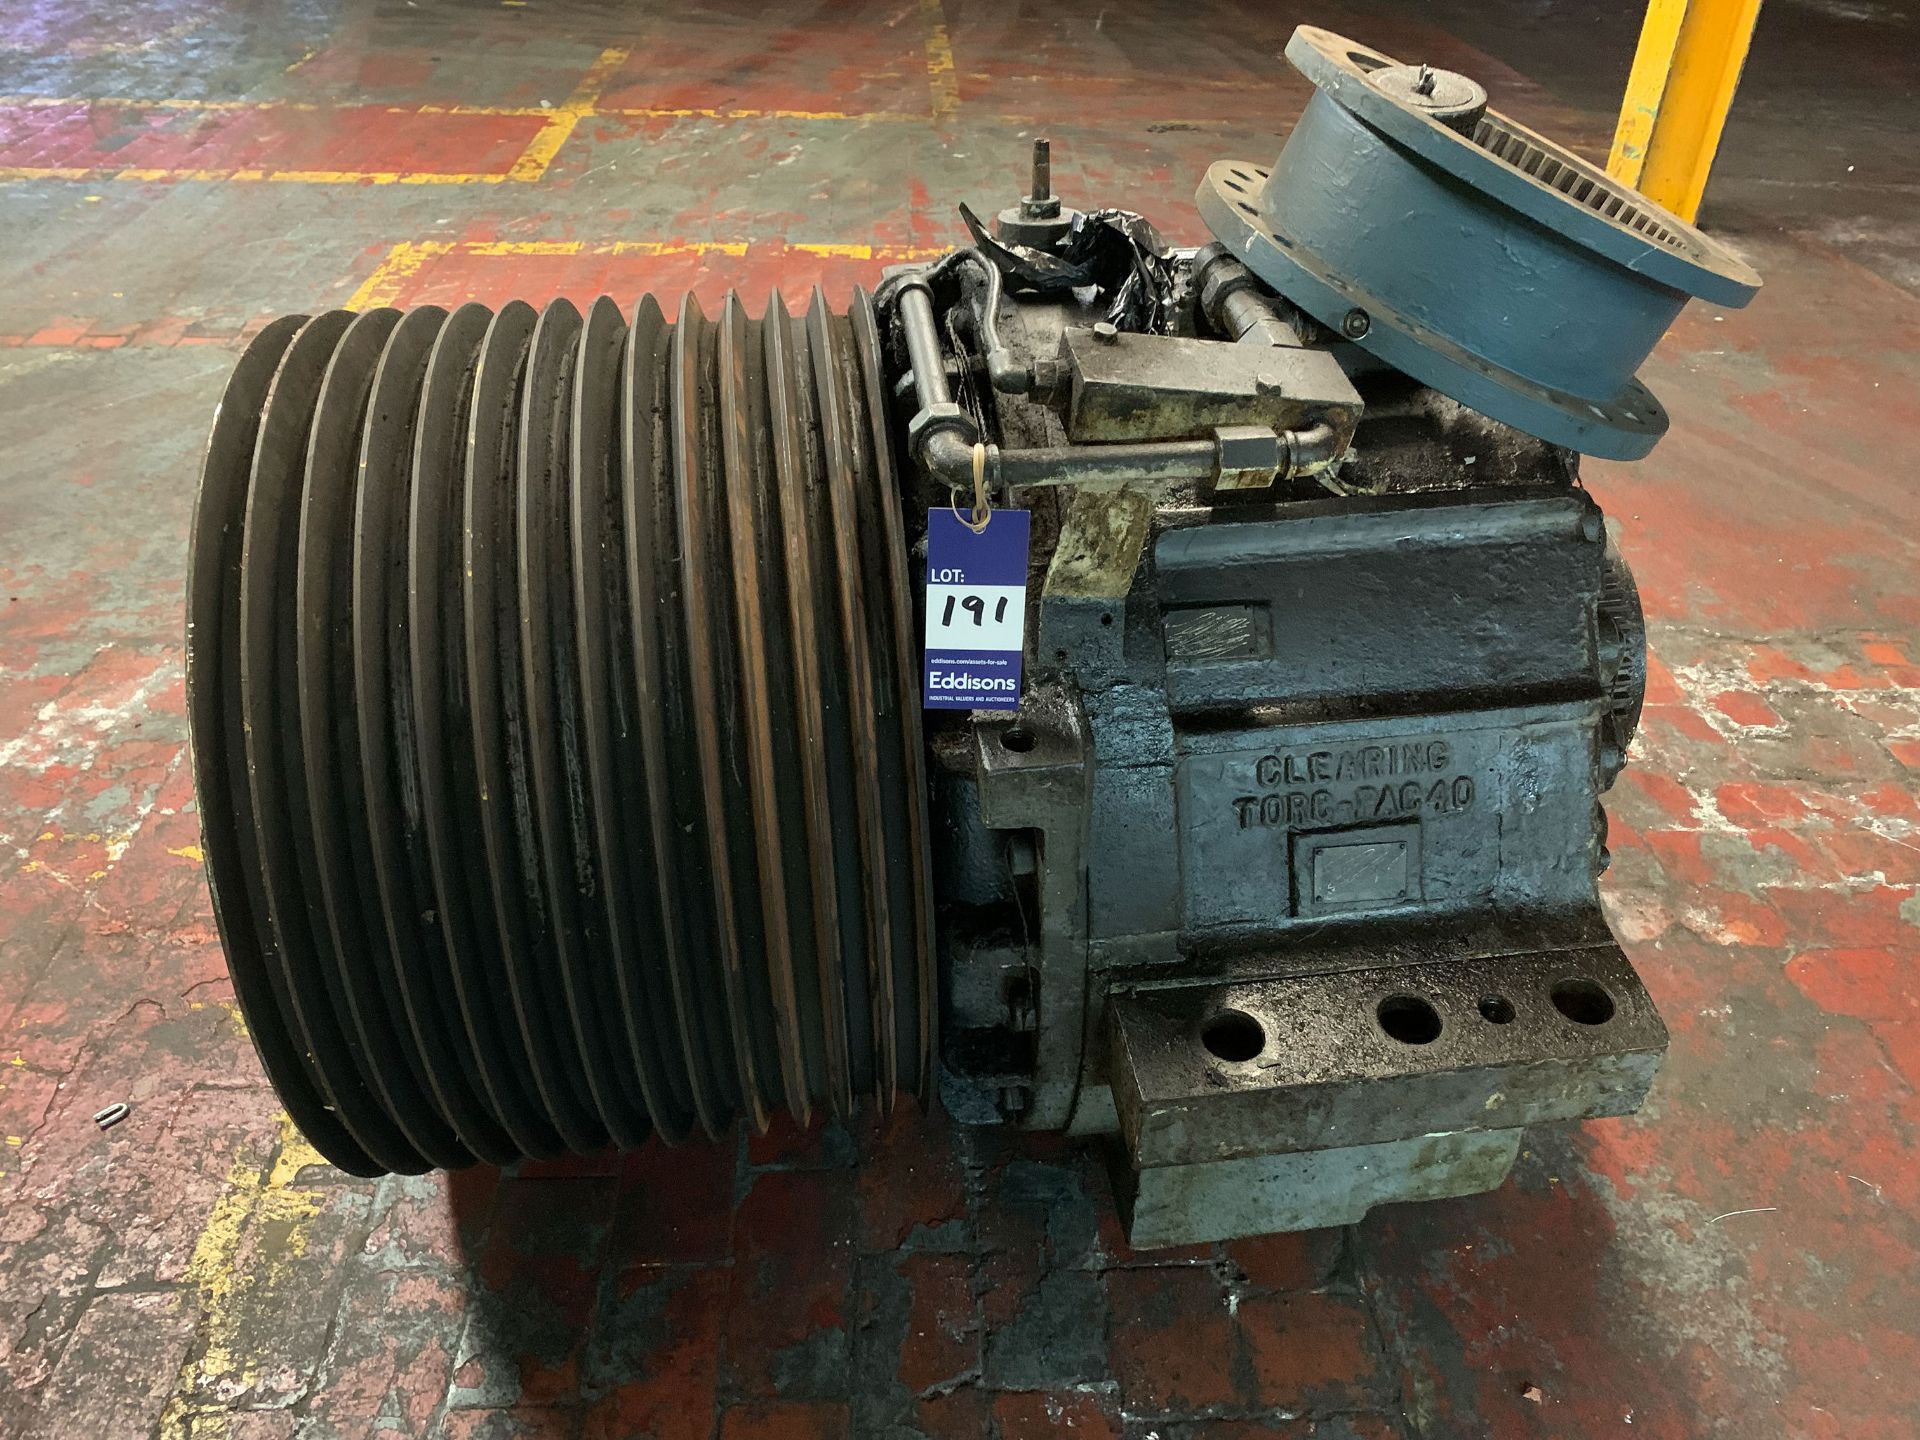 A Clearing Torcpac 40 Replacement Press Gearbox - Image 6 of 7